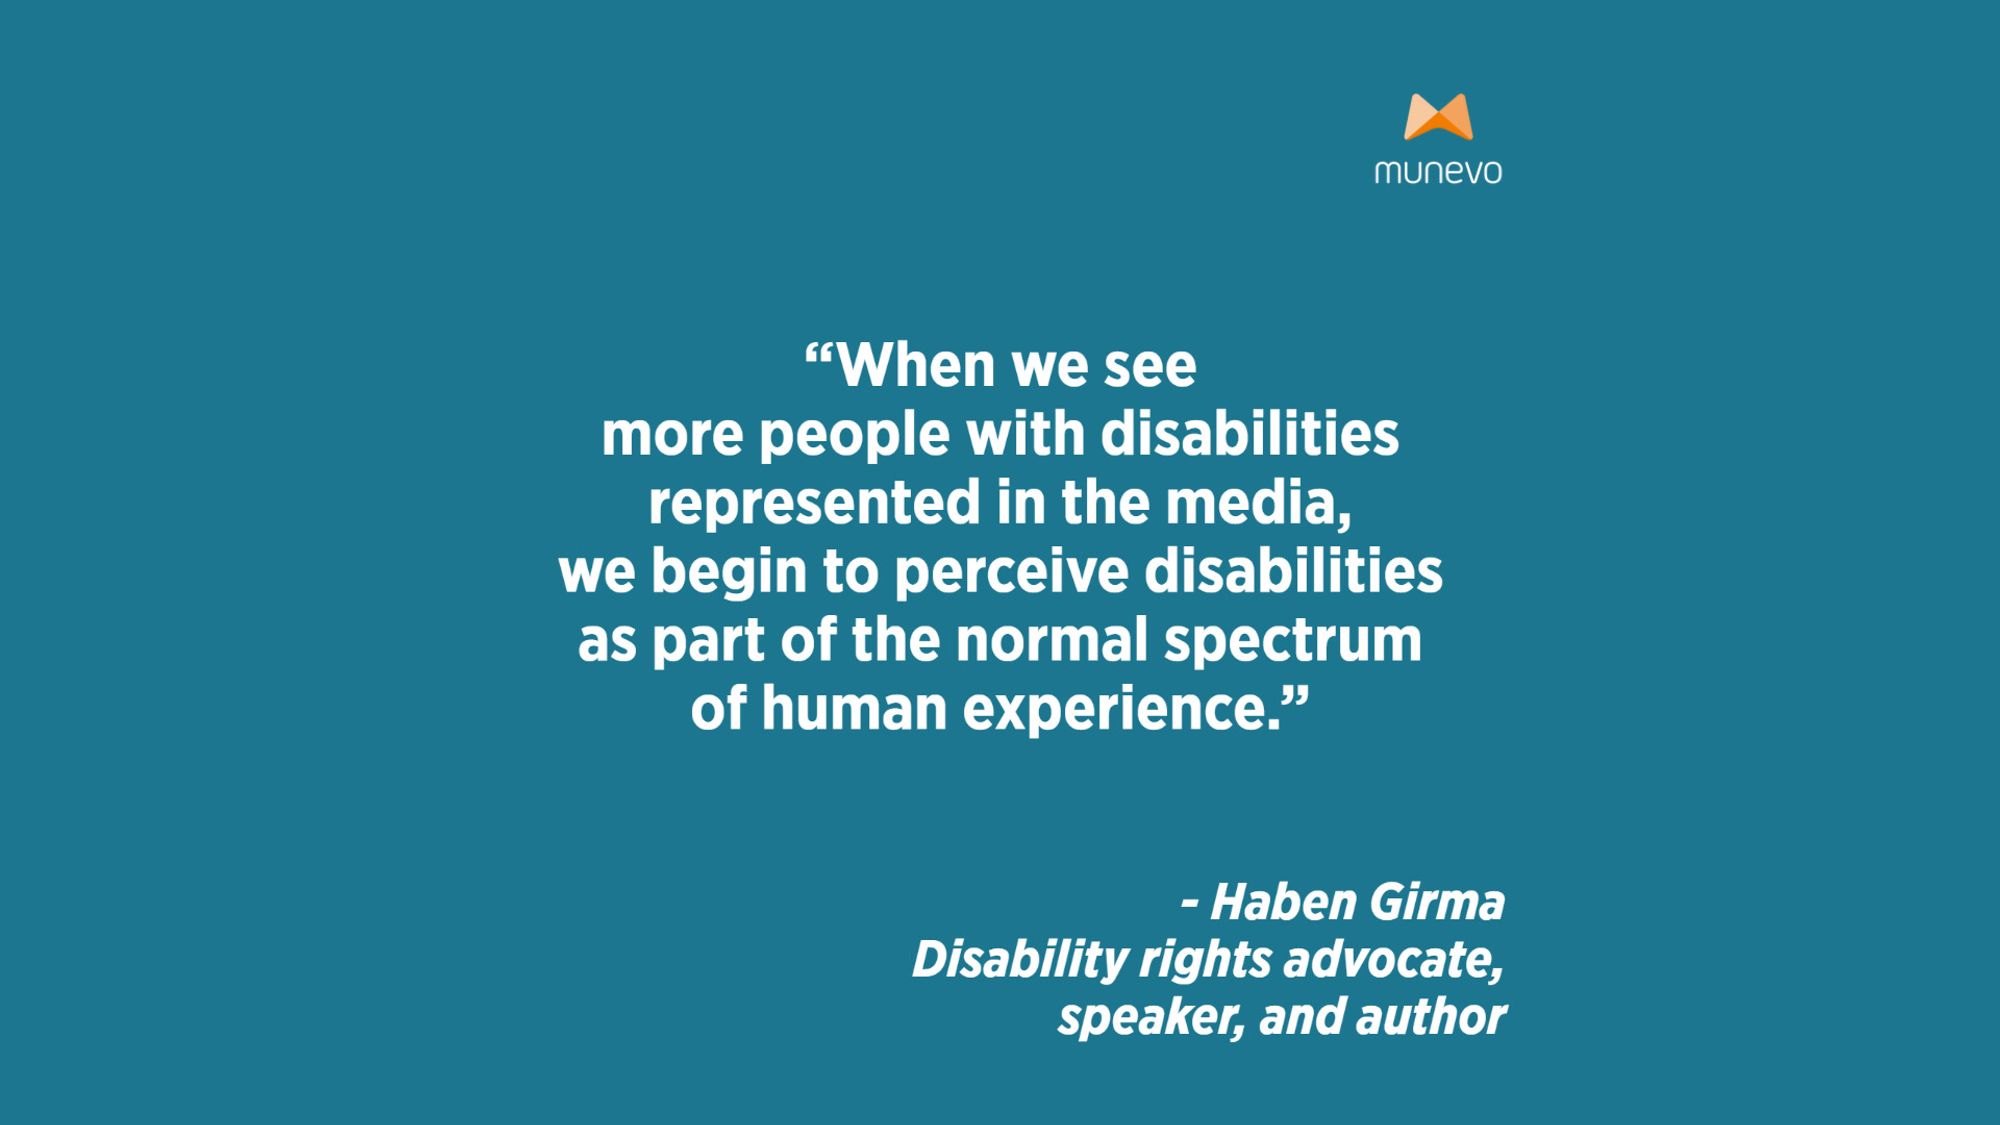 "When we see more people with disabilities represented in the media, we begin to perceive disabilities as part of the normal spectrum of human experience" - Haben Girma, Disability rights advocate, speaker, and author